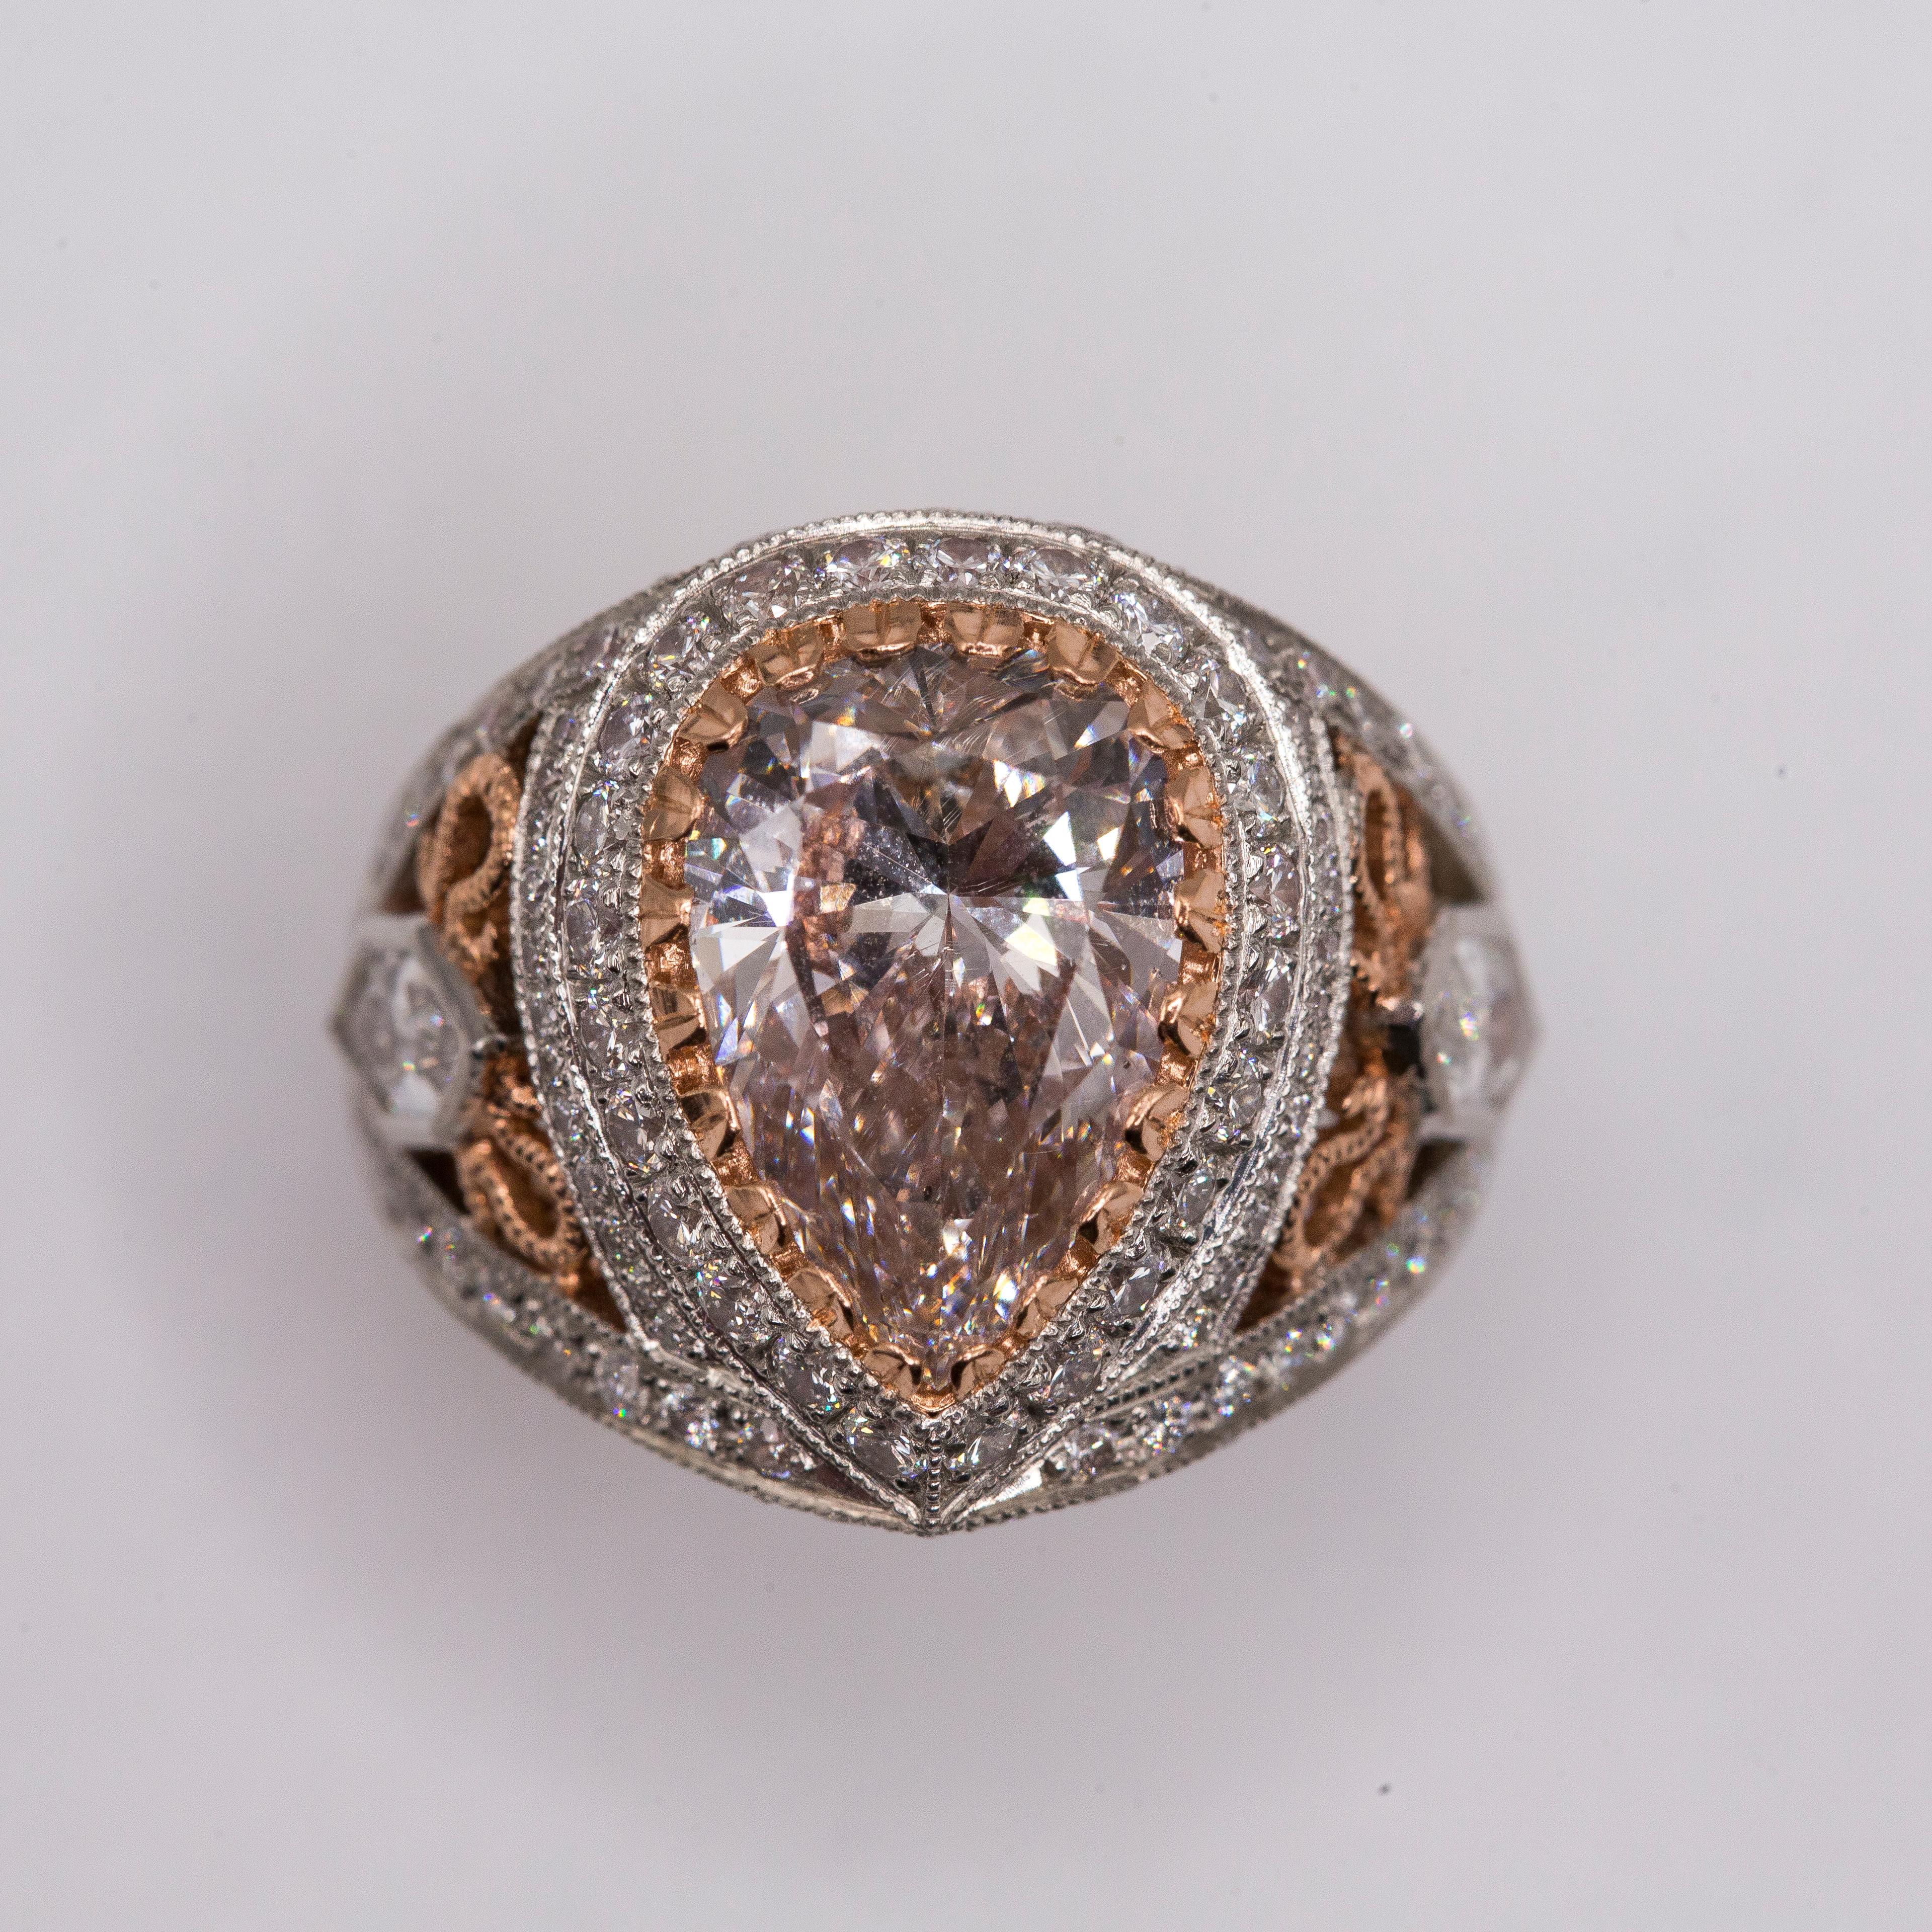 A Masterpiece by renowned jewelry designer Anthony Gerard DiMaggio. A superbly cut 3.60 carat light pink diamond with a very faint brownish tint, certified natural by Gemological Institute of America (GIA New York Report attached) adorns the ring